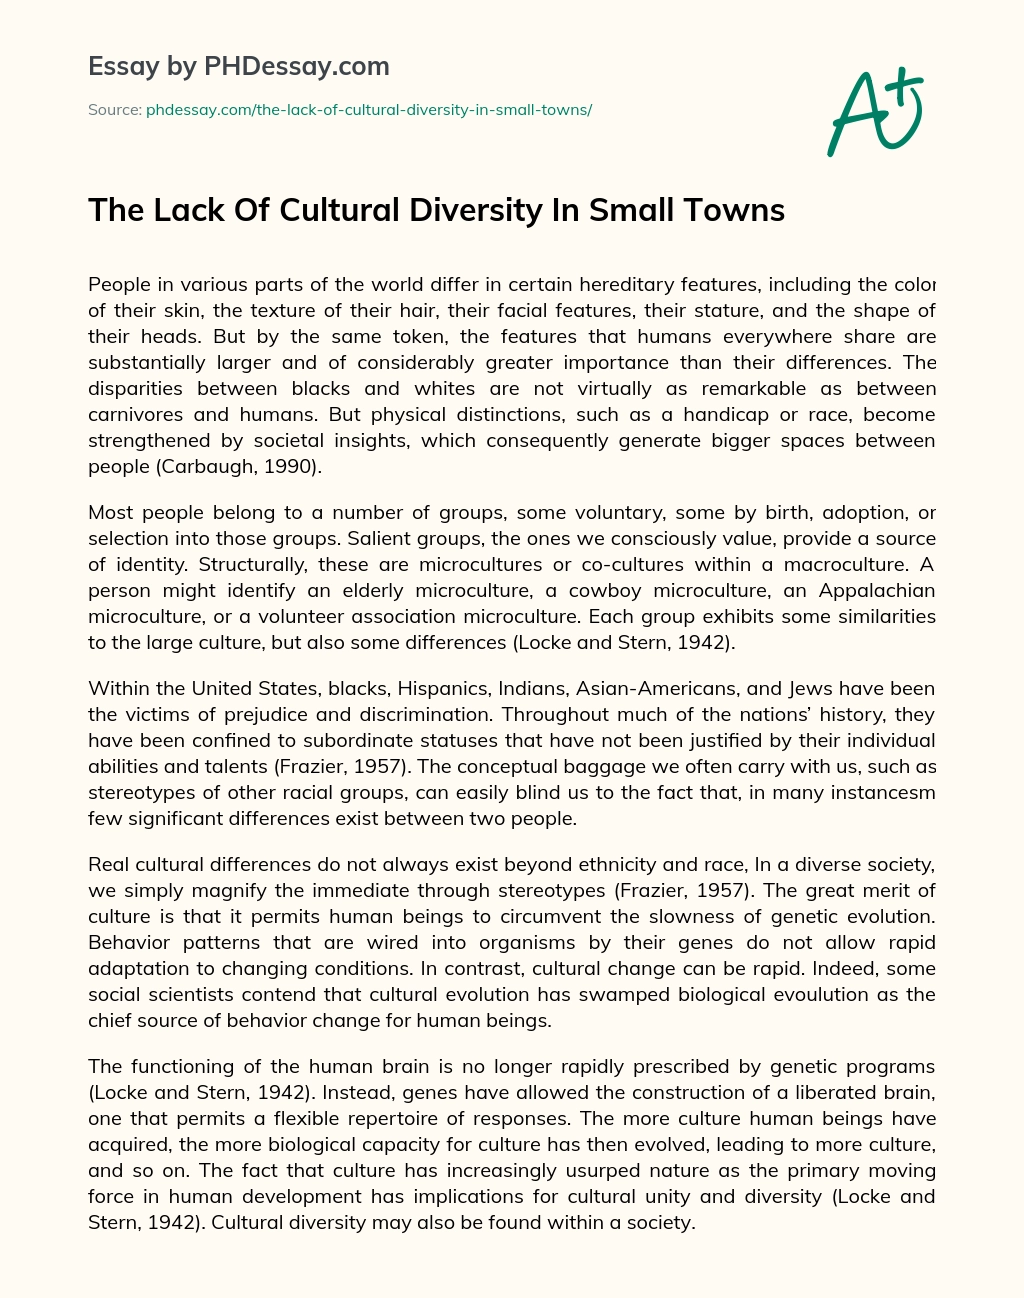 The Lack Of Cultural Diversity In Small Towns essay